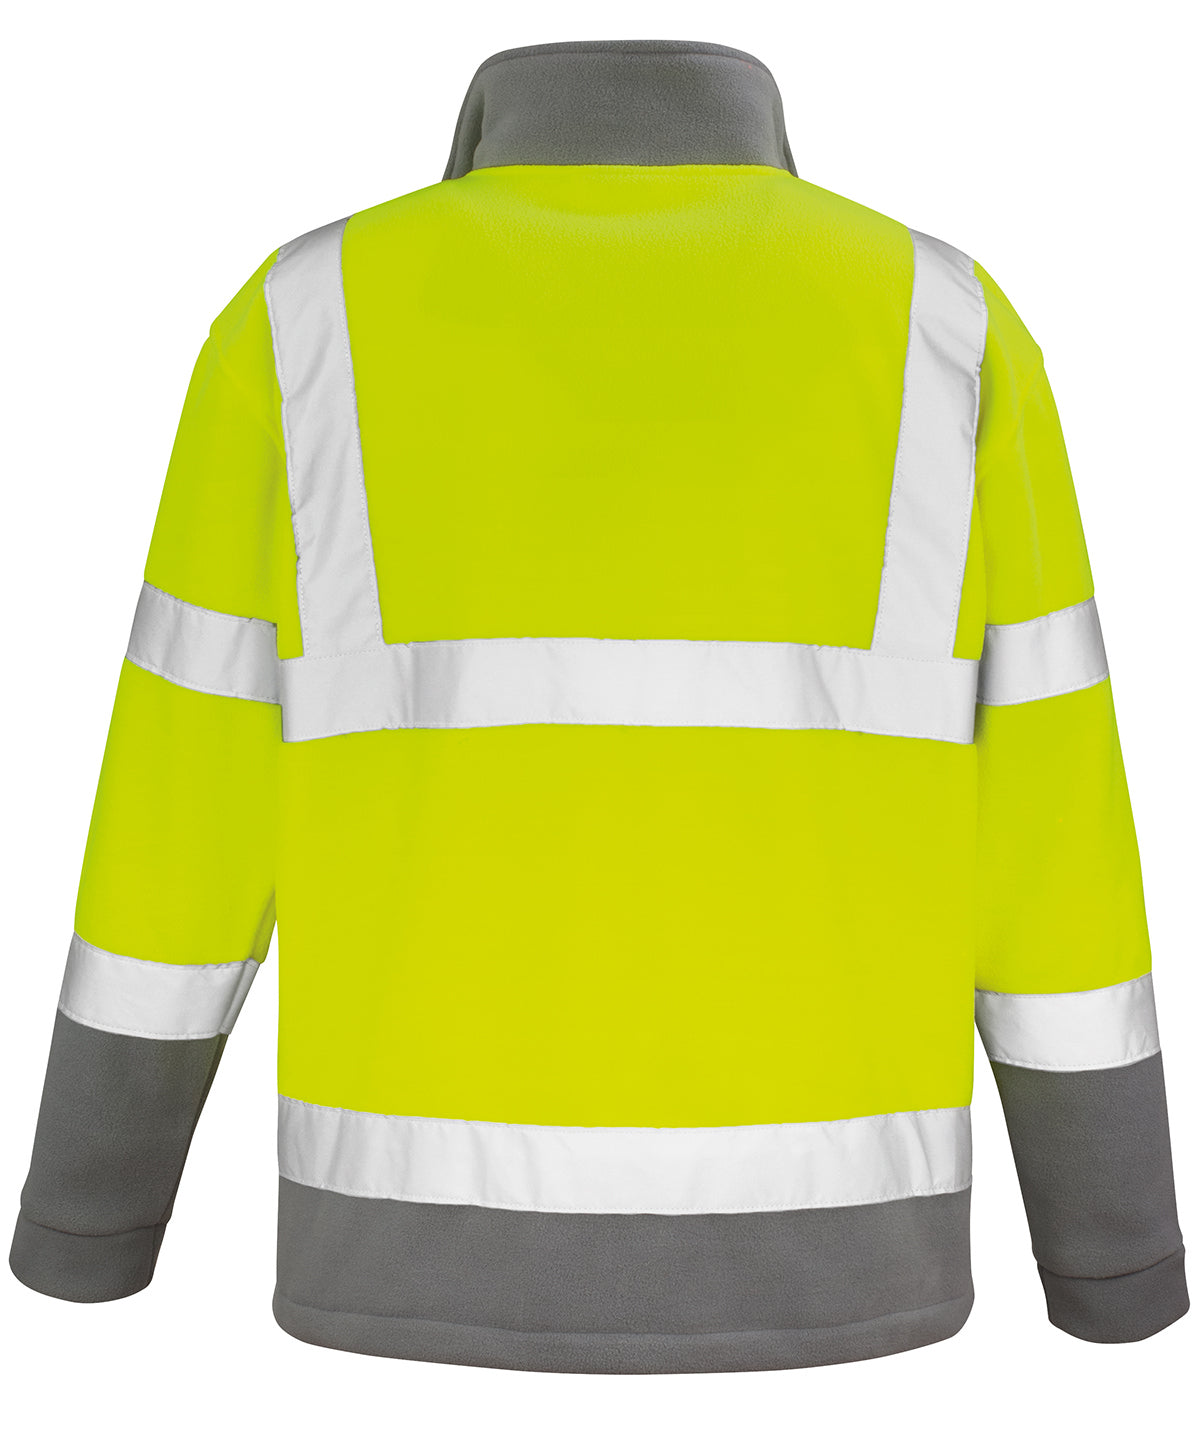 Safety microfleece